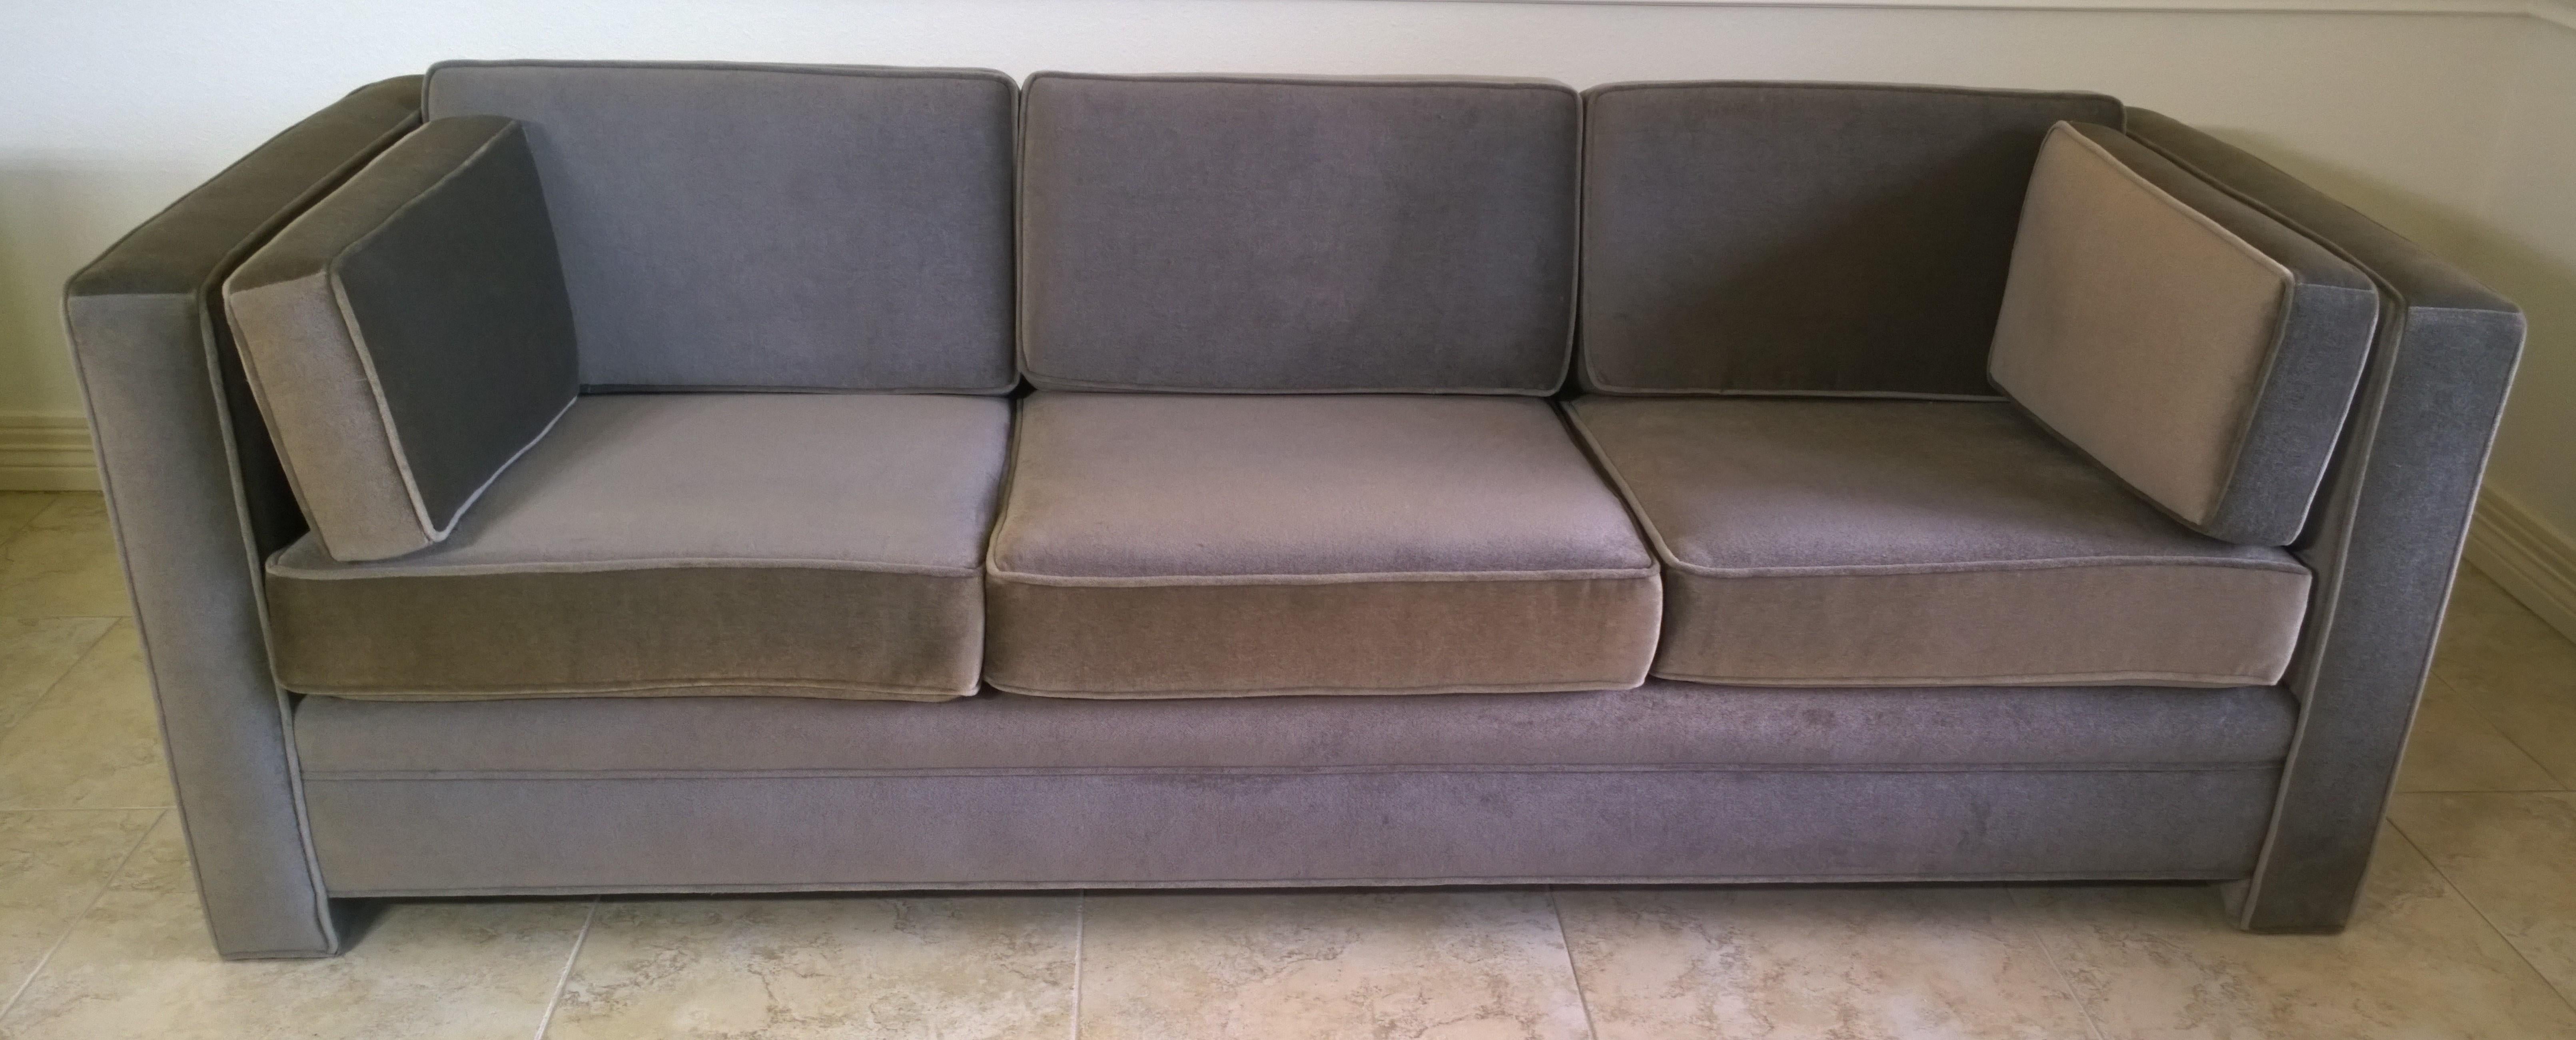 Offered is a Mid-Century Modern Milo Baughman style newly upholstered mohair wool tuxedo sofa in a warm gray color way. This piece is a three-seat sofa with three seat cushions and three back cushions and two armrest cushions. The sofa is quite